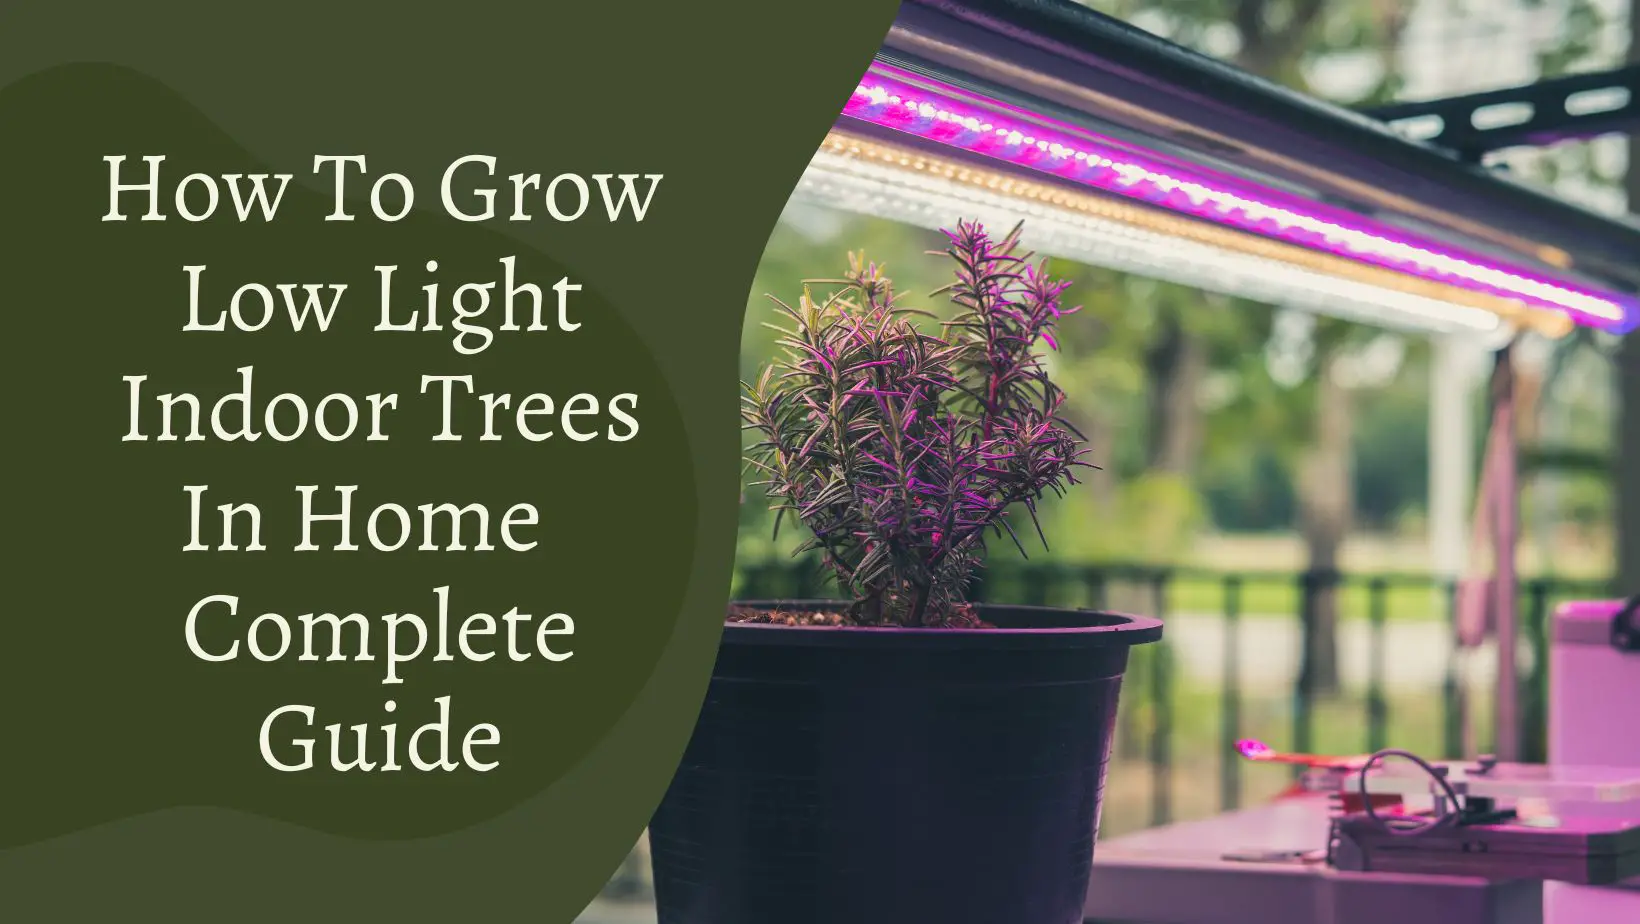 How To Grow Low Light Indoor Trees In Home – Complete Guide